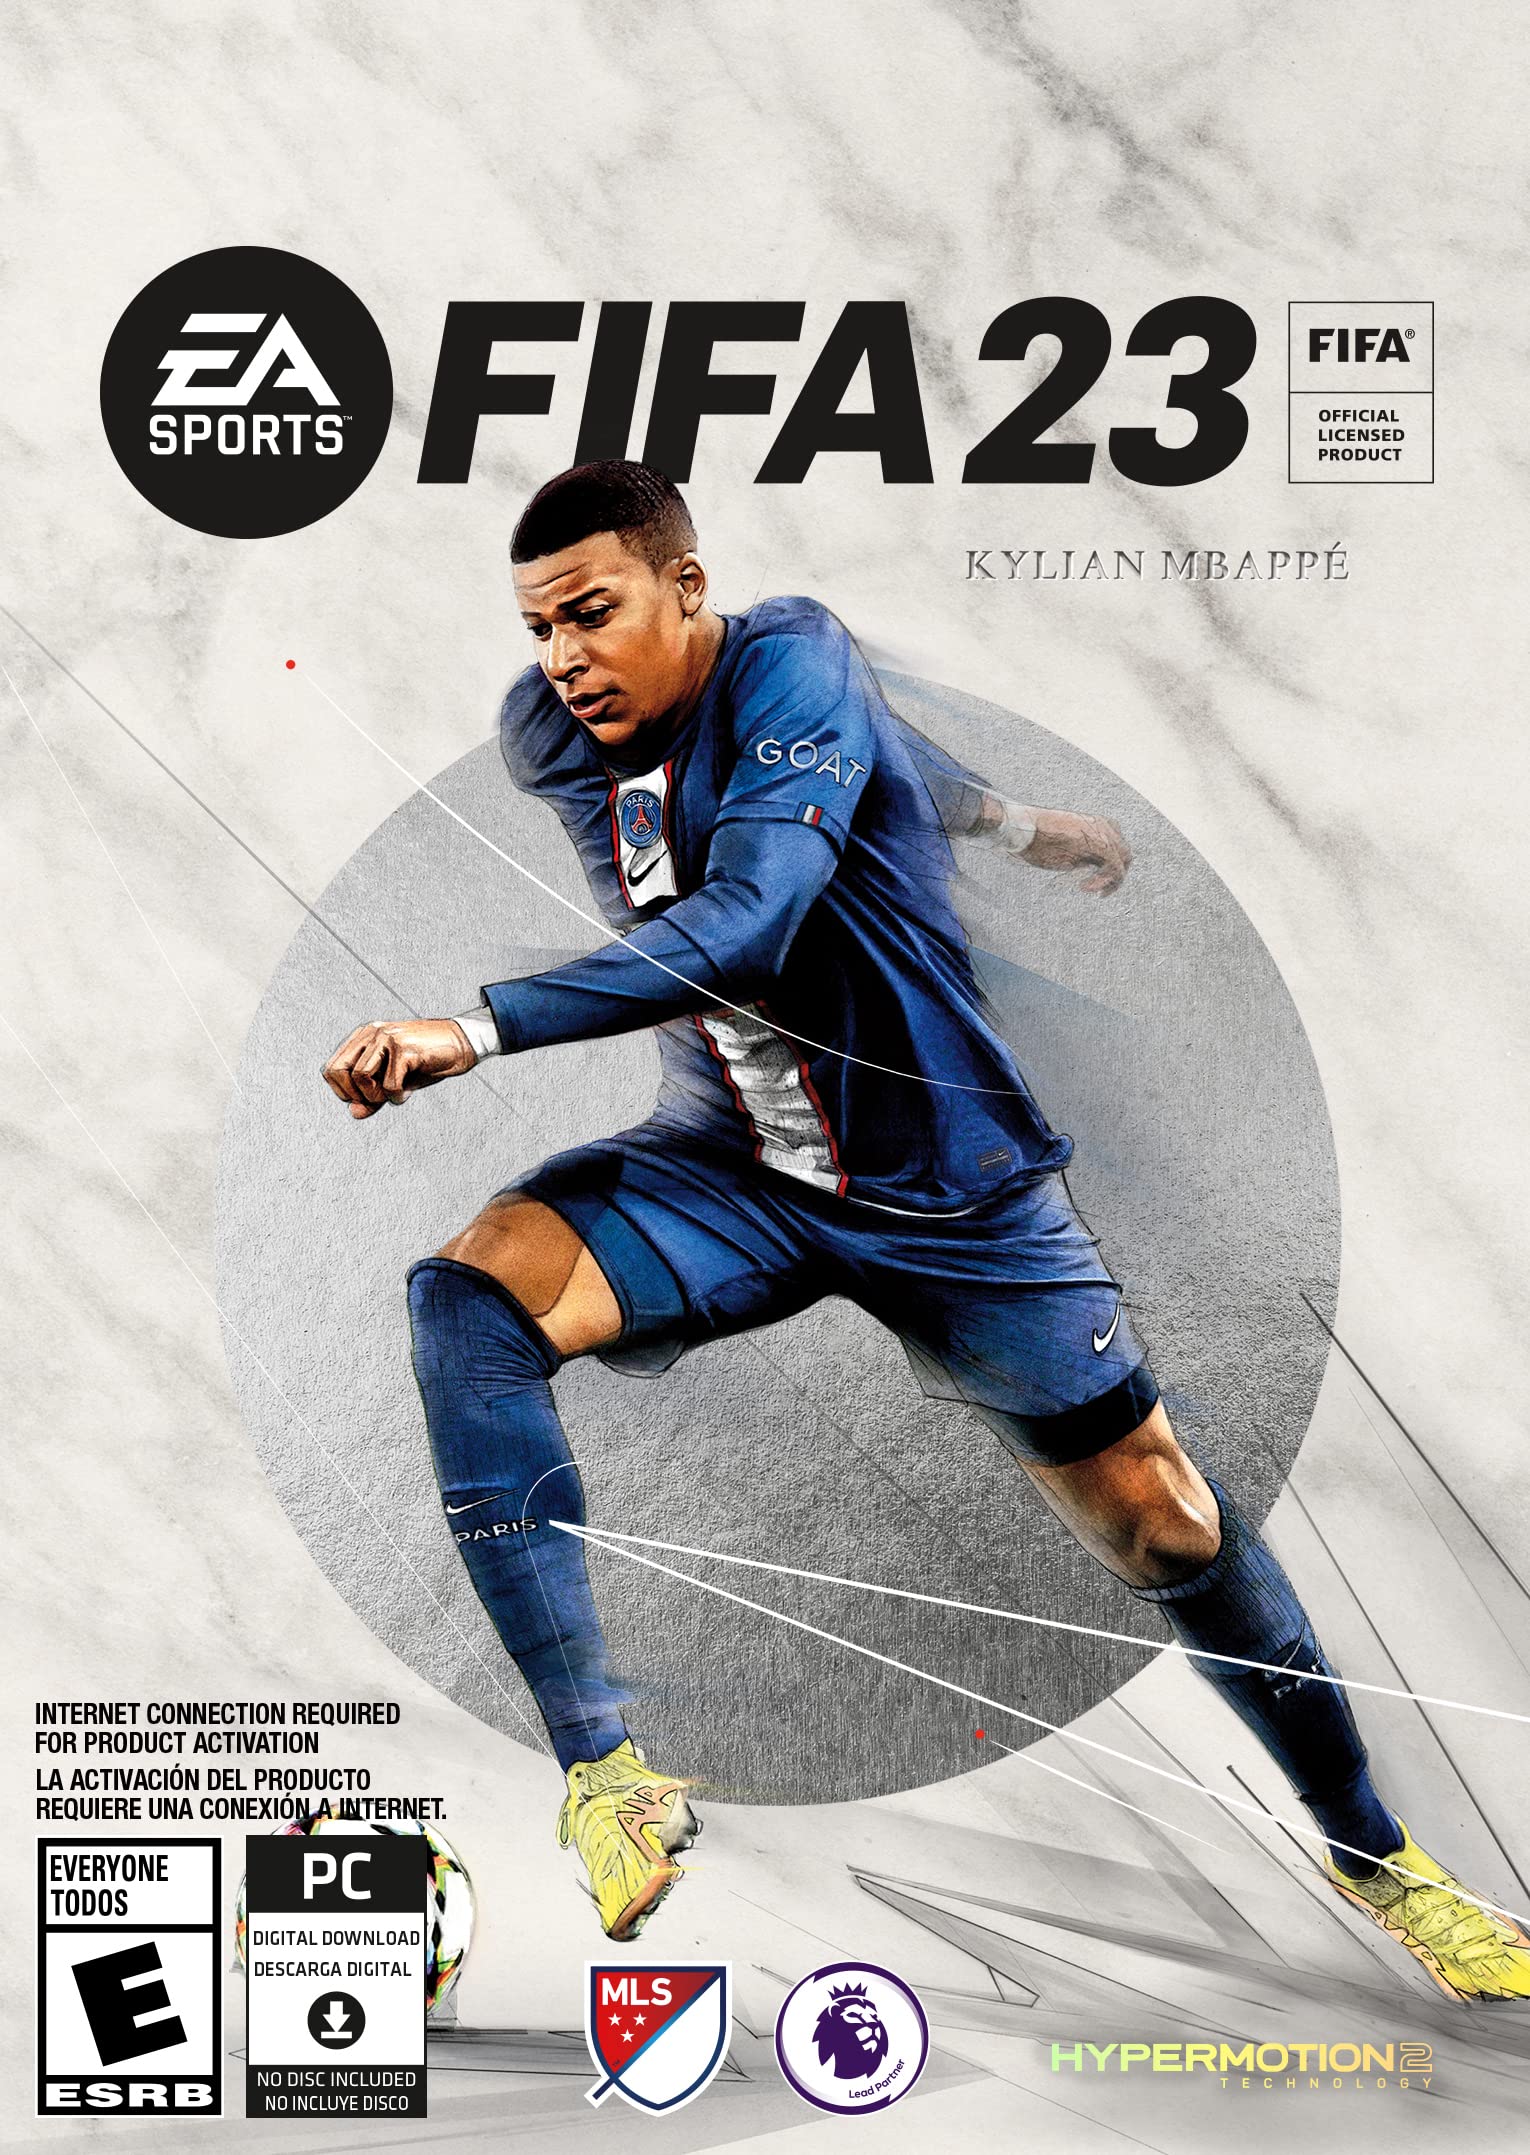 FIFA 23 Digital versions received a price drop 27.99 on PC.  xbox  & ps5 34.99